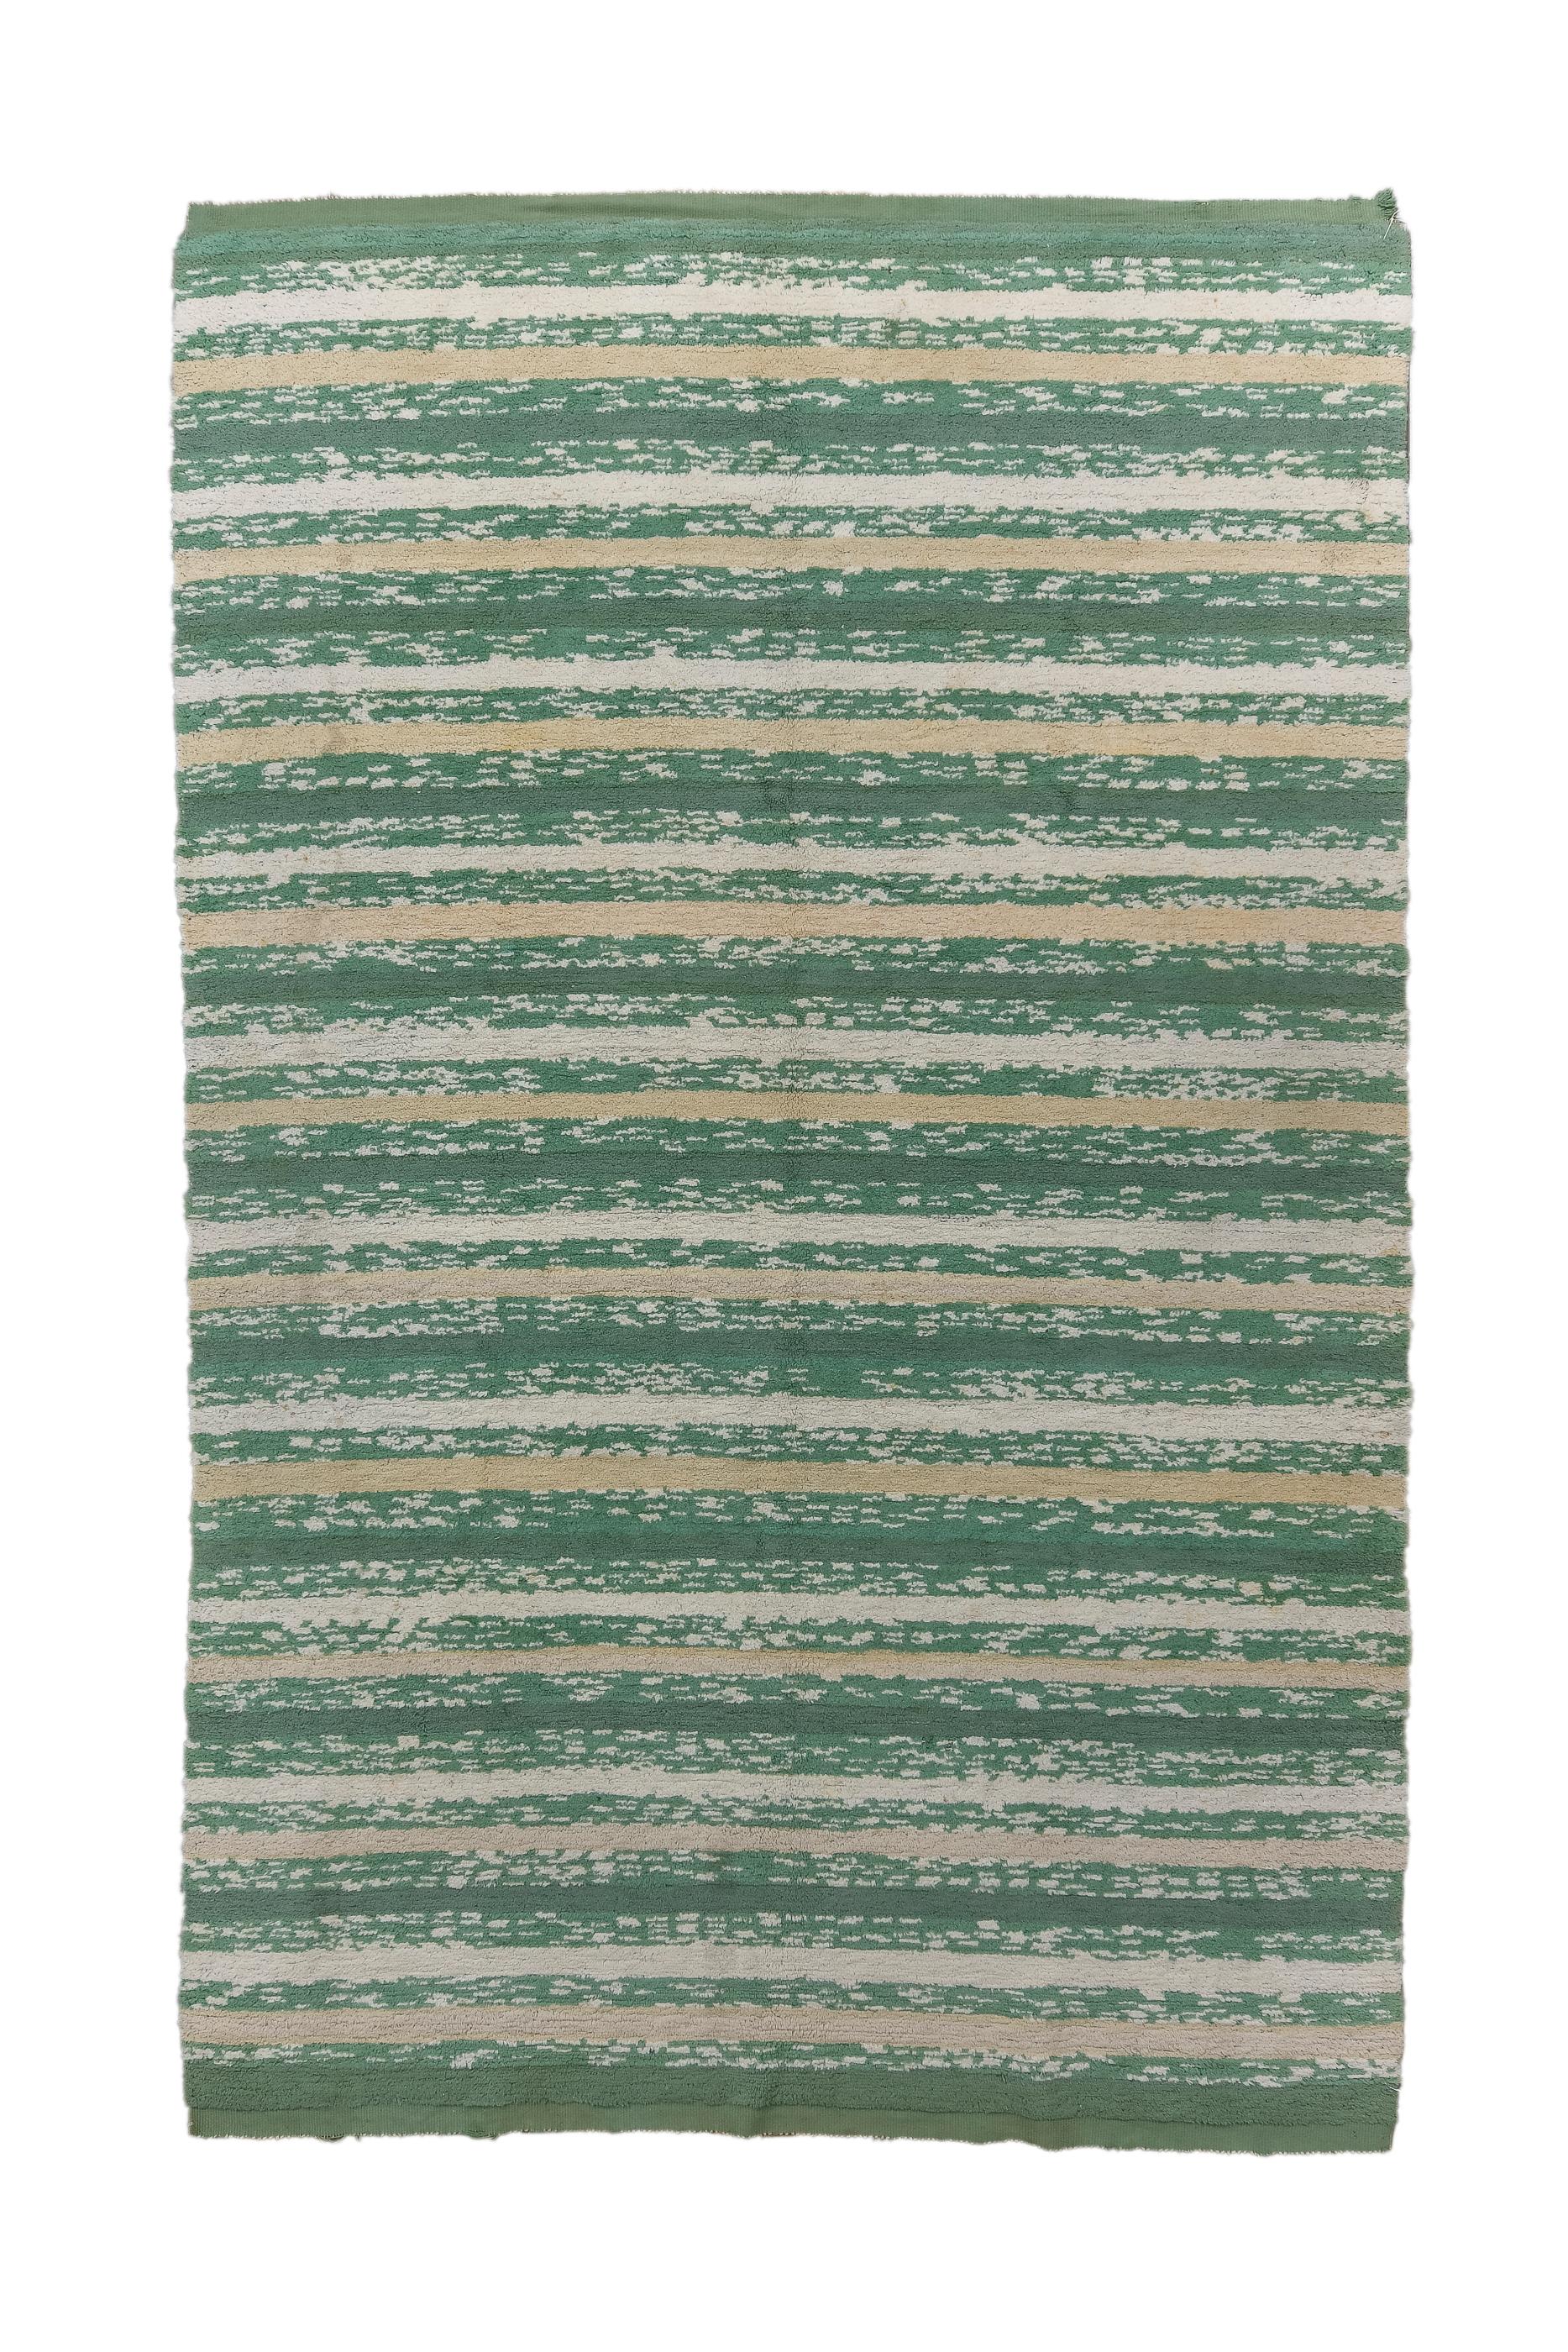 A very minimal flatweave with a horizontal band design in which green is the reference color for the development of all the contrasts in ivory, beige and cream which make the entire graphic composition of this fantastic artefact dynamic. This type